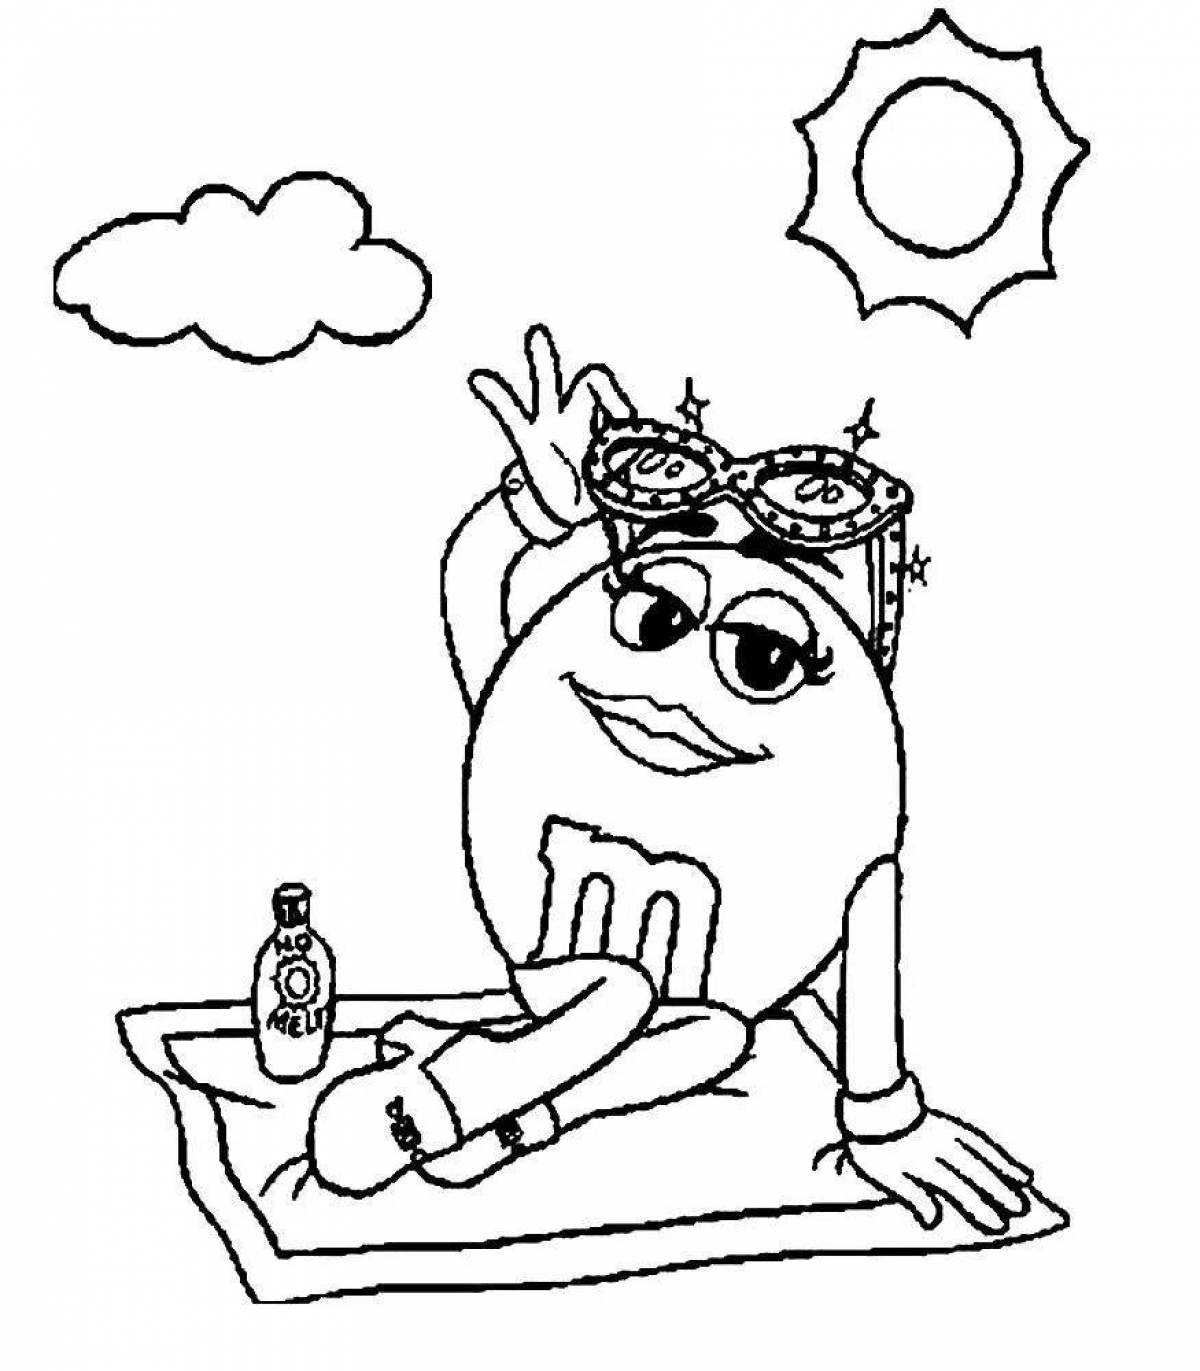 Animated coloring page end